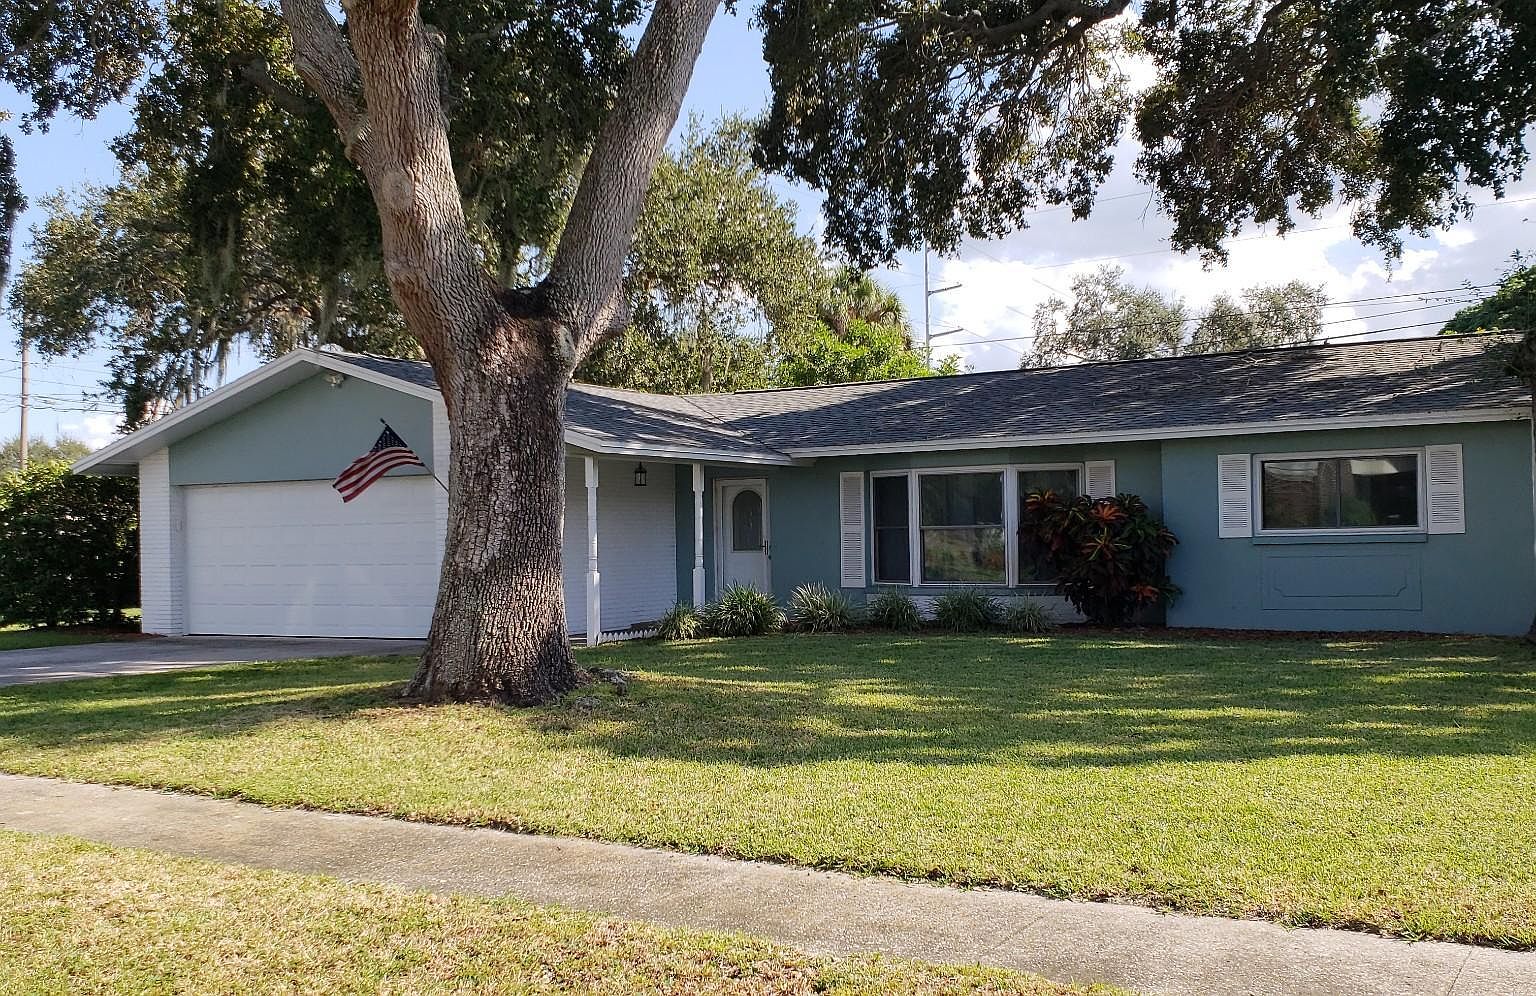 2199 Viola Dr Clearwater Fl 33764 Zillow